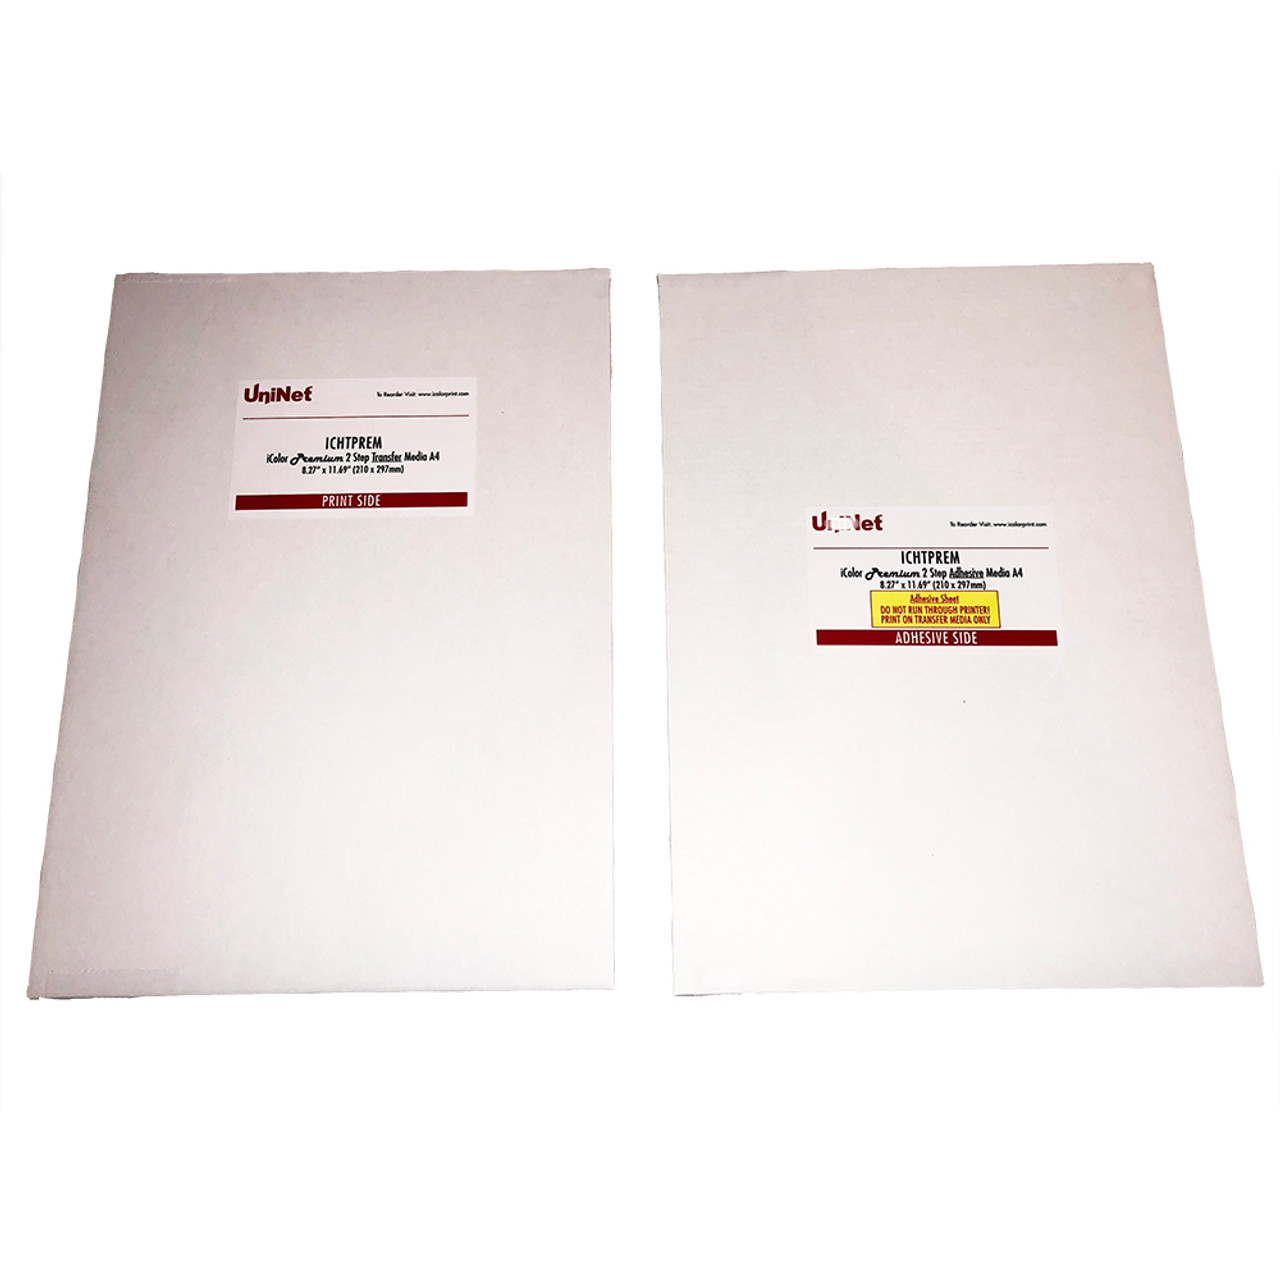 Sawgrass Premium Sublimation Heat Transfer Paper 8.5 inch x 11 inch - 100 Sheets